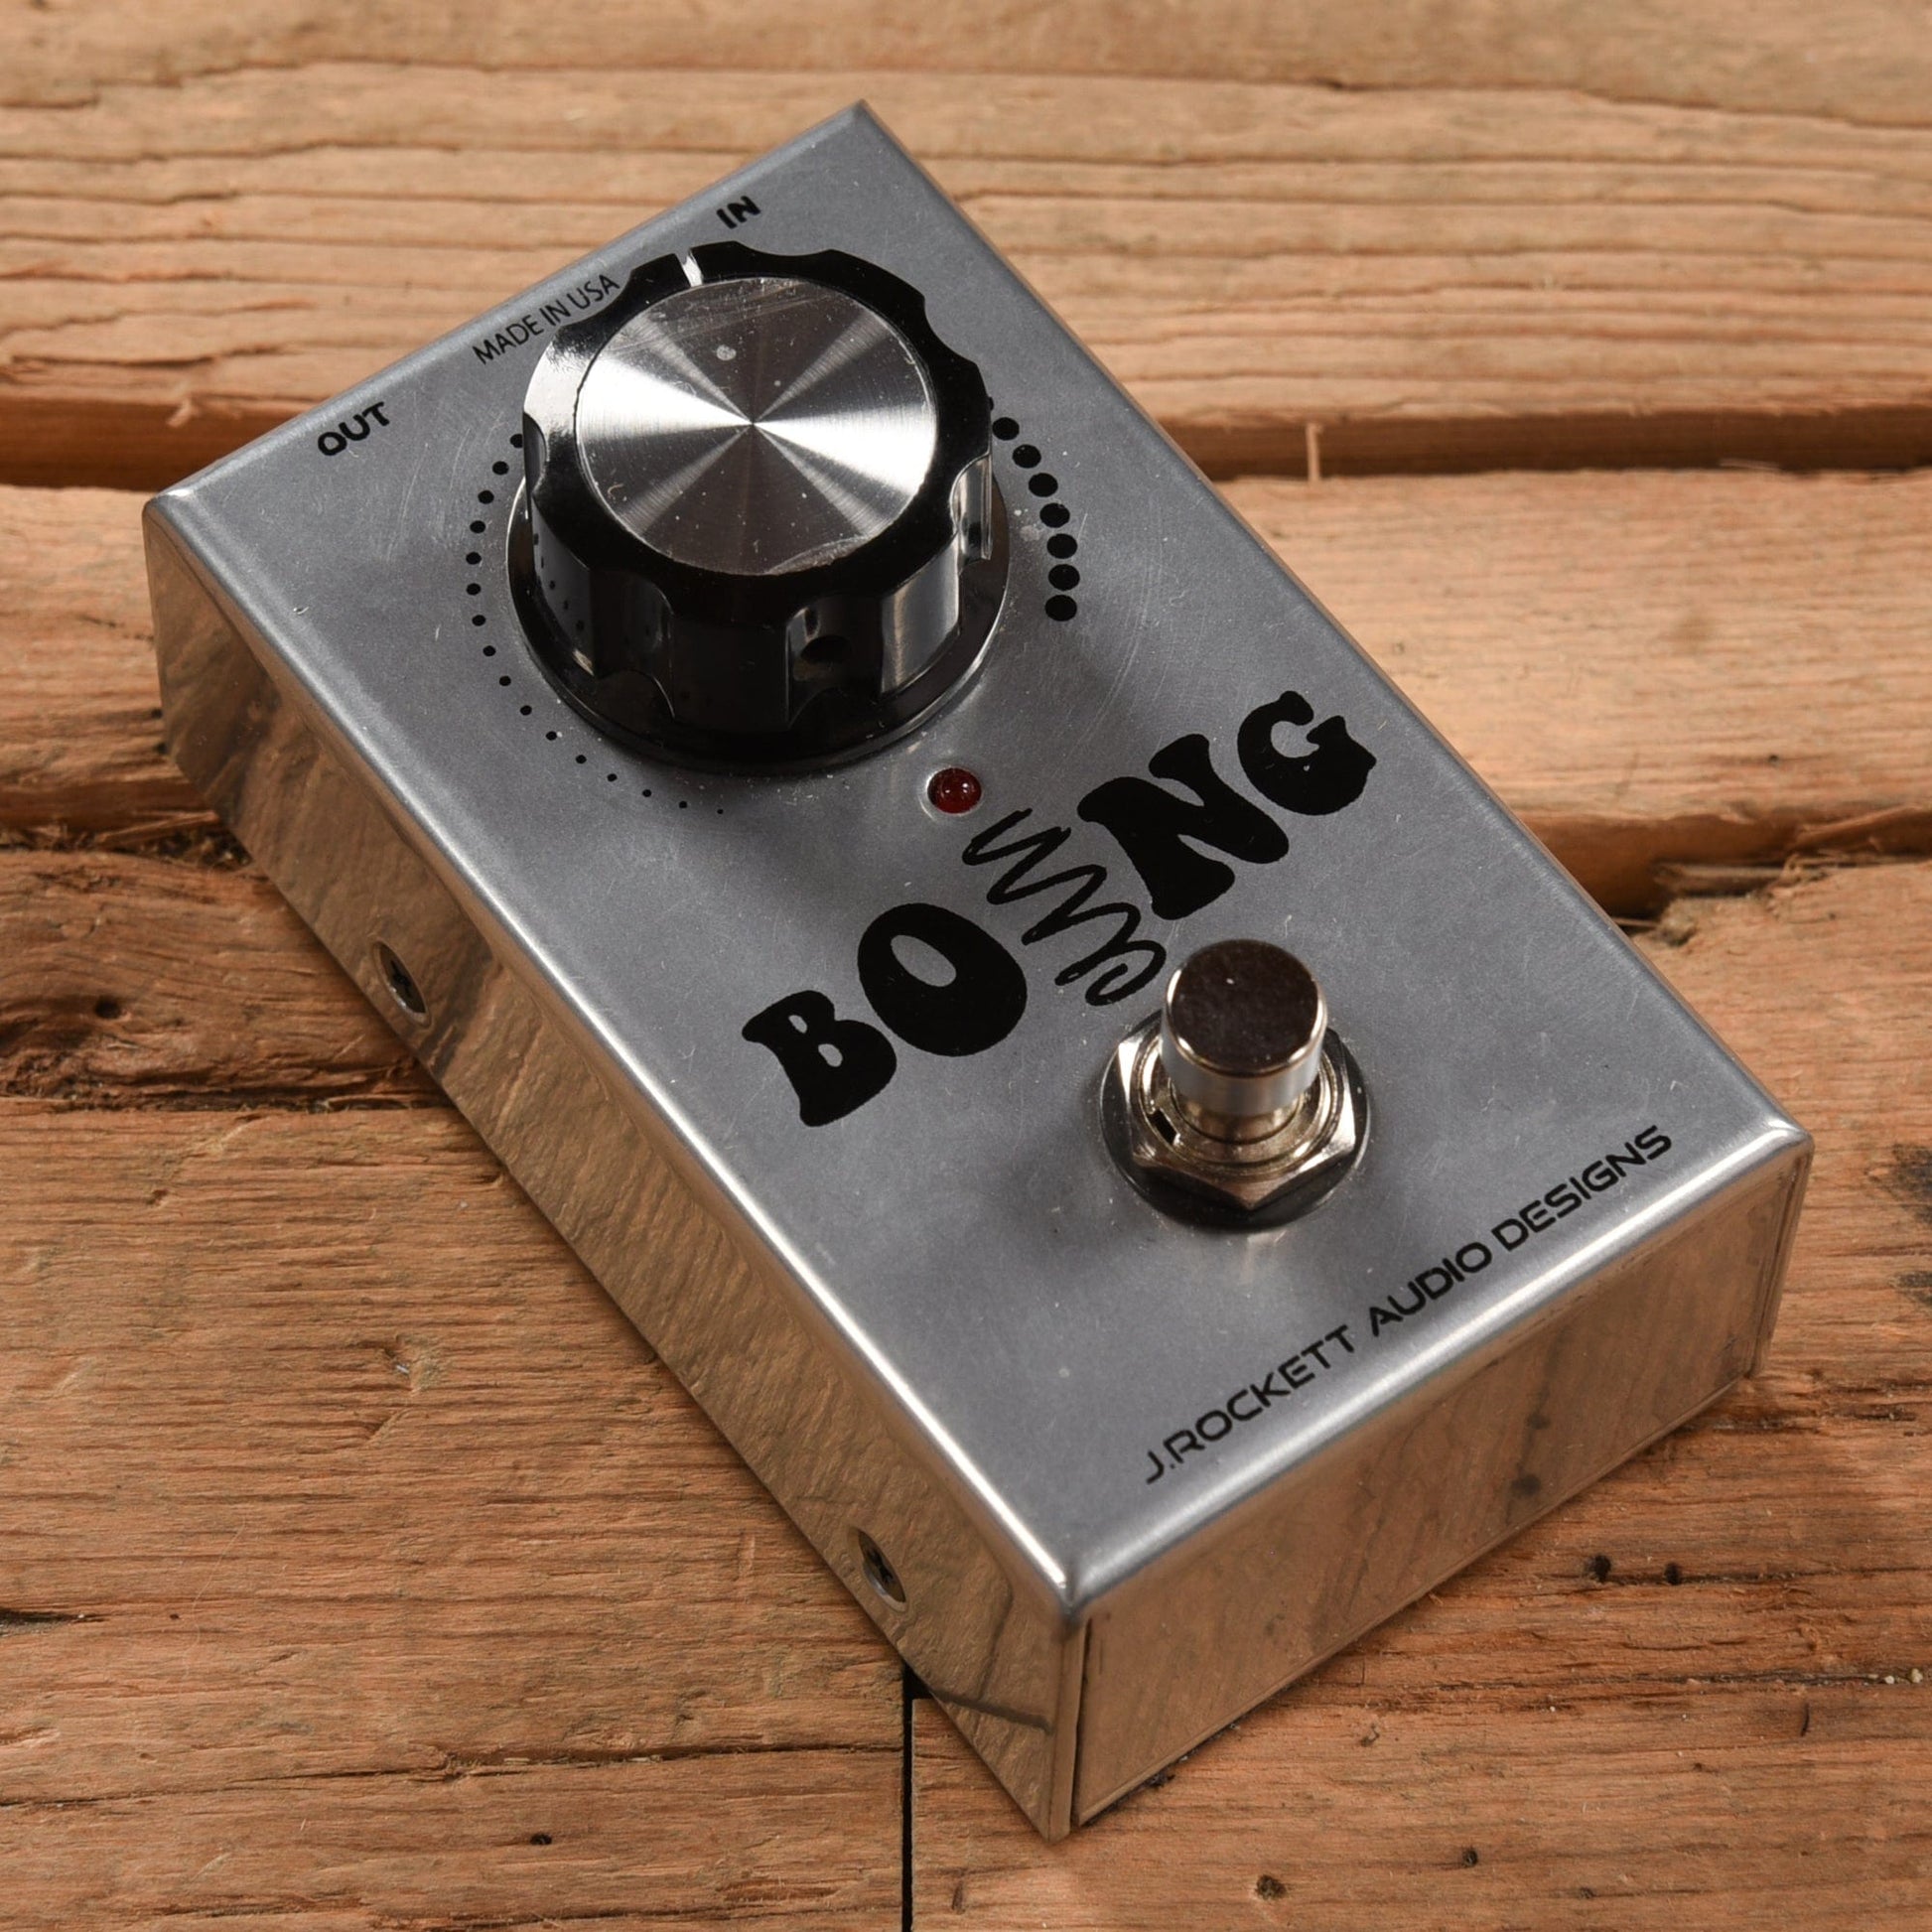 J.Rockett Boing Effects and Pedals / Reverb